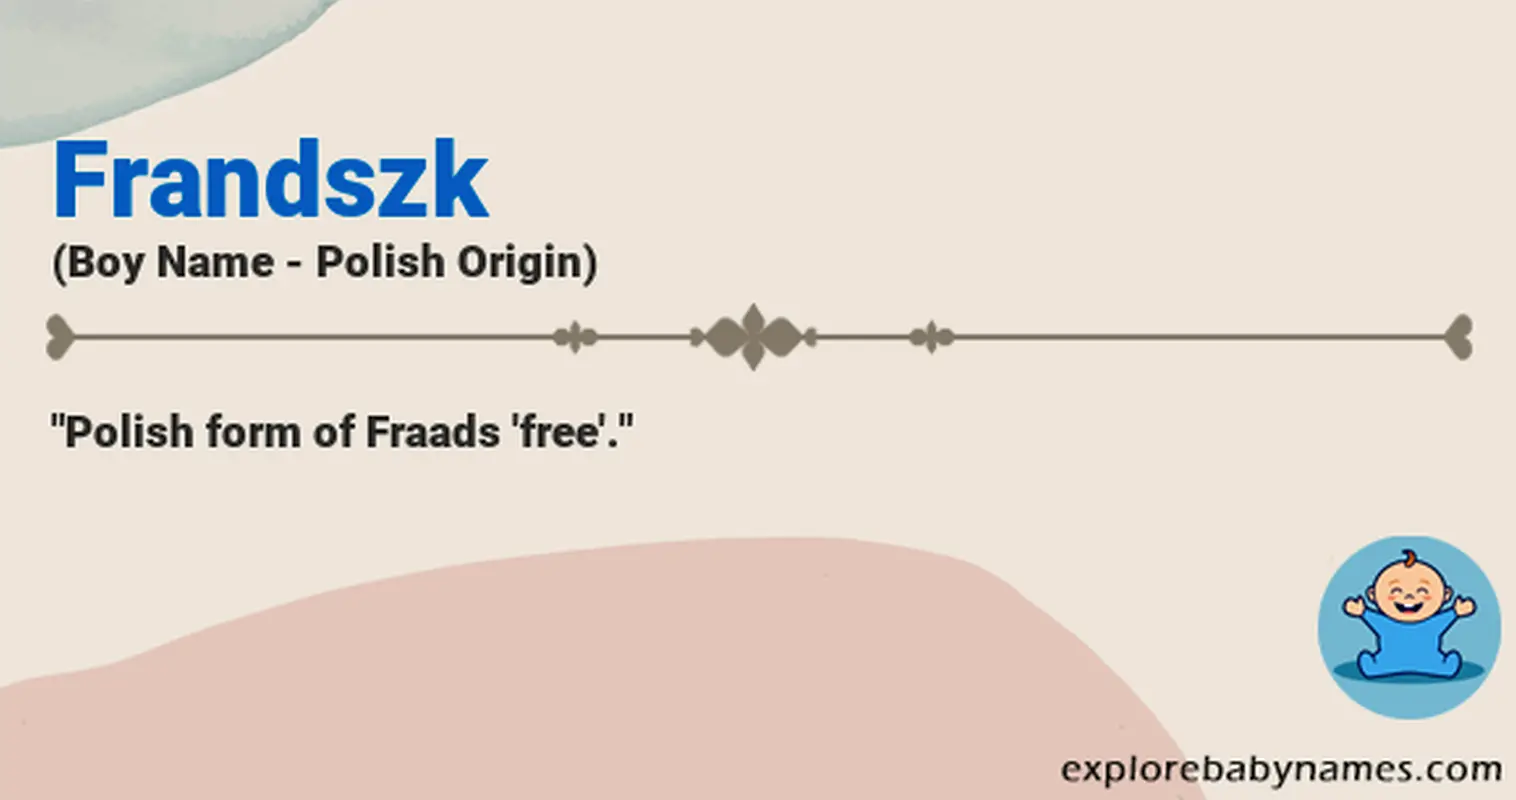 Meaning of Frandszk